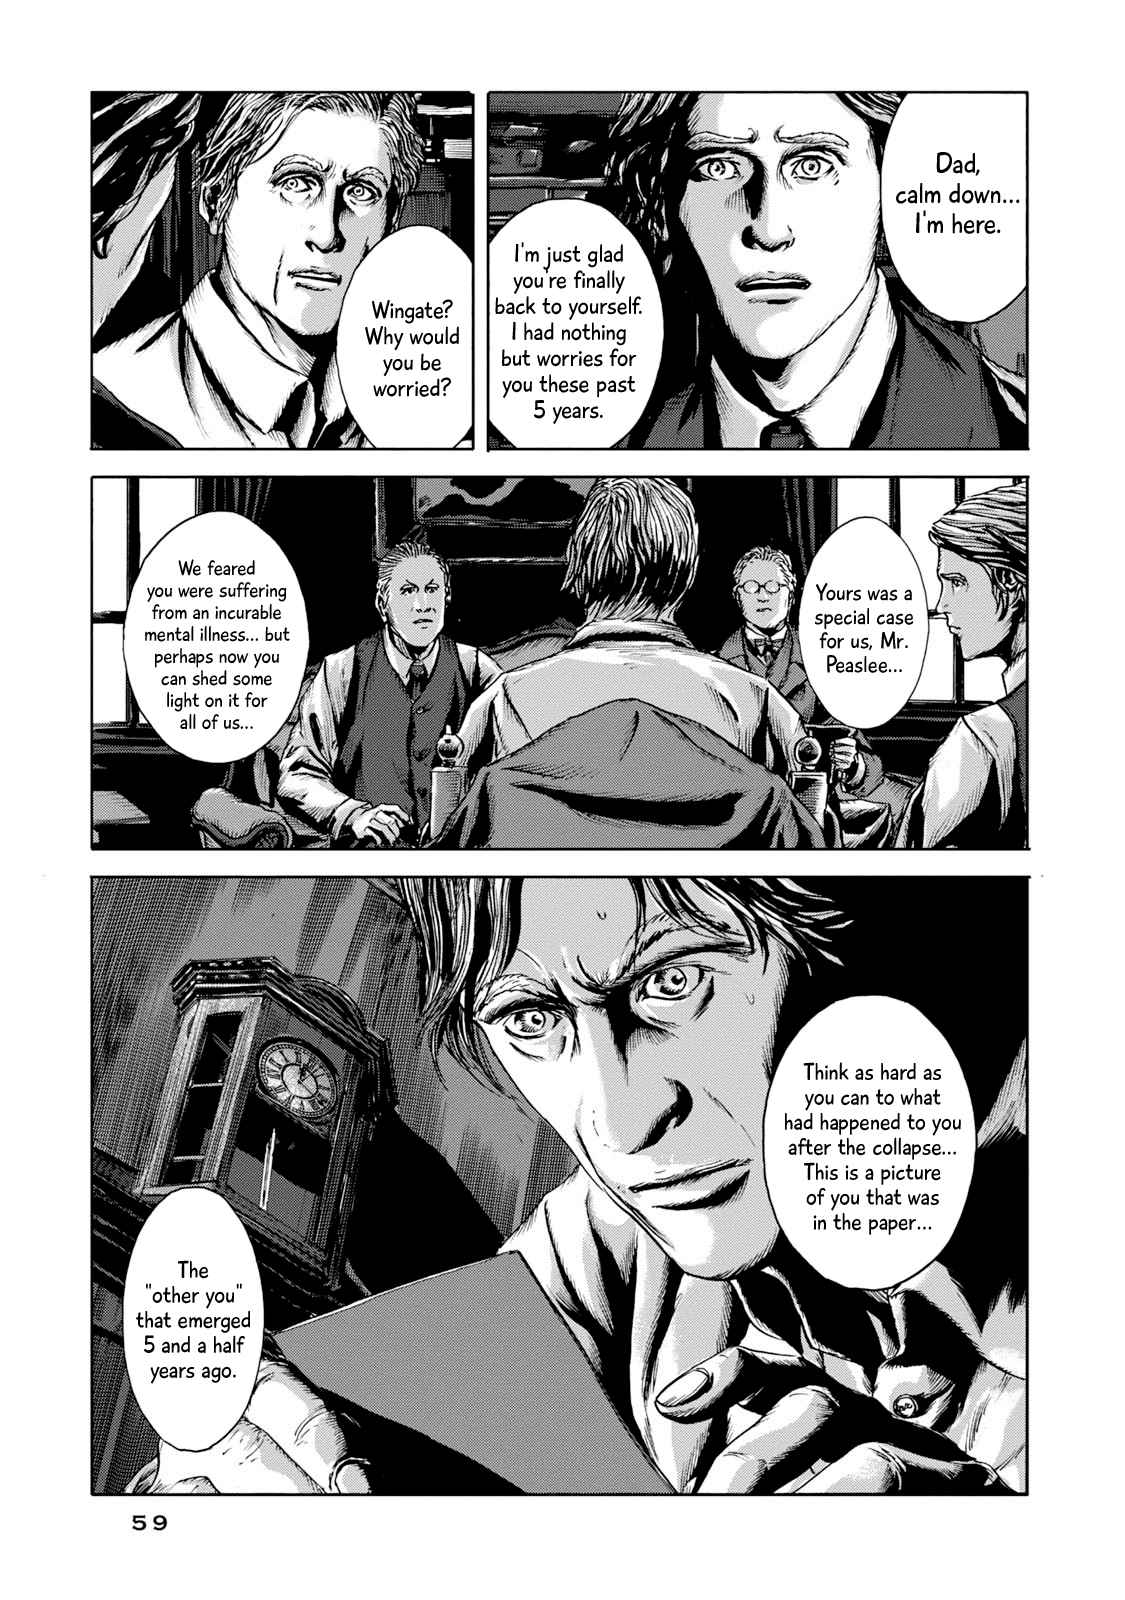 H. P. Lovecraft's The Shadow out of Time Vol. 1 Ch. 1 The Queer Amnesia